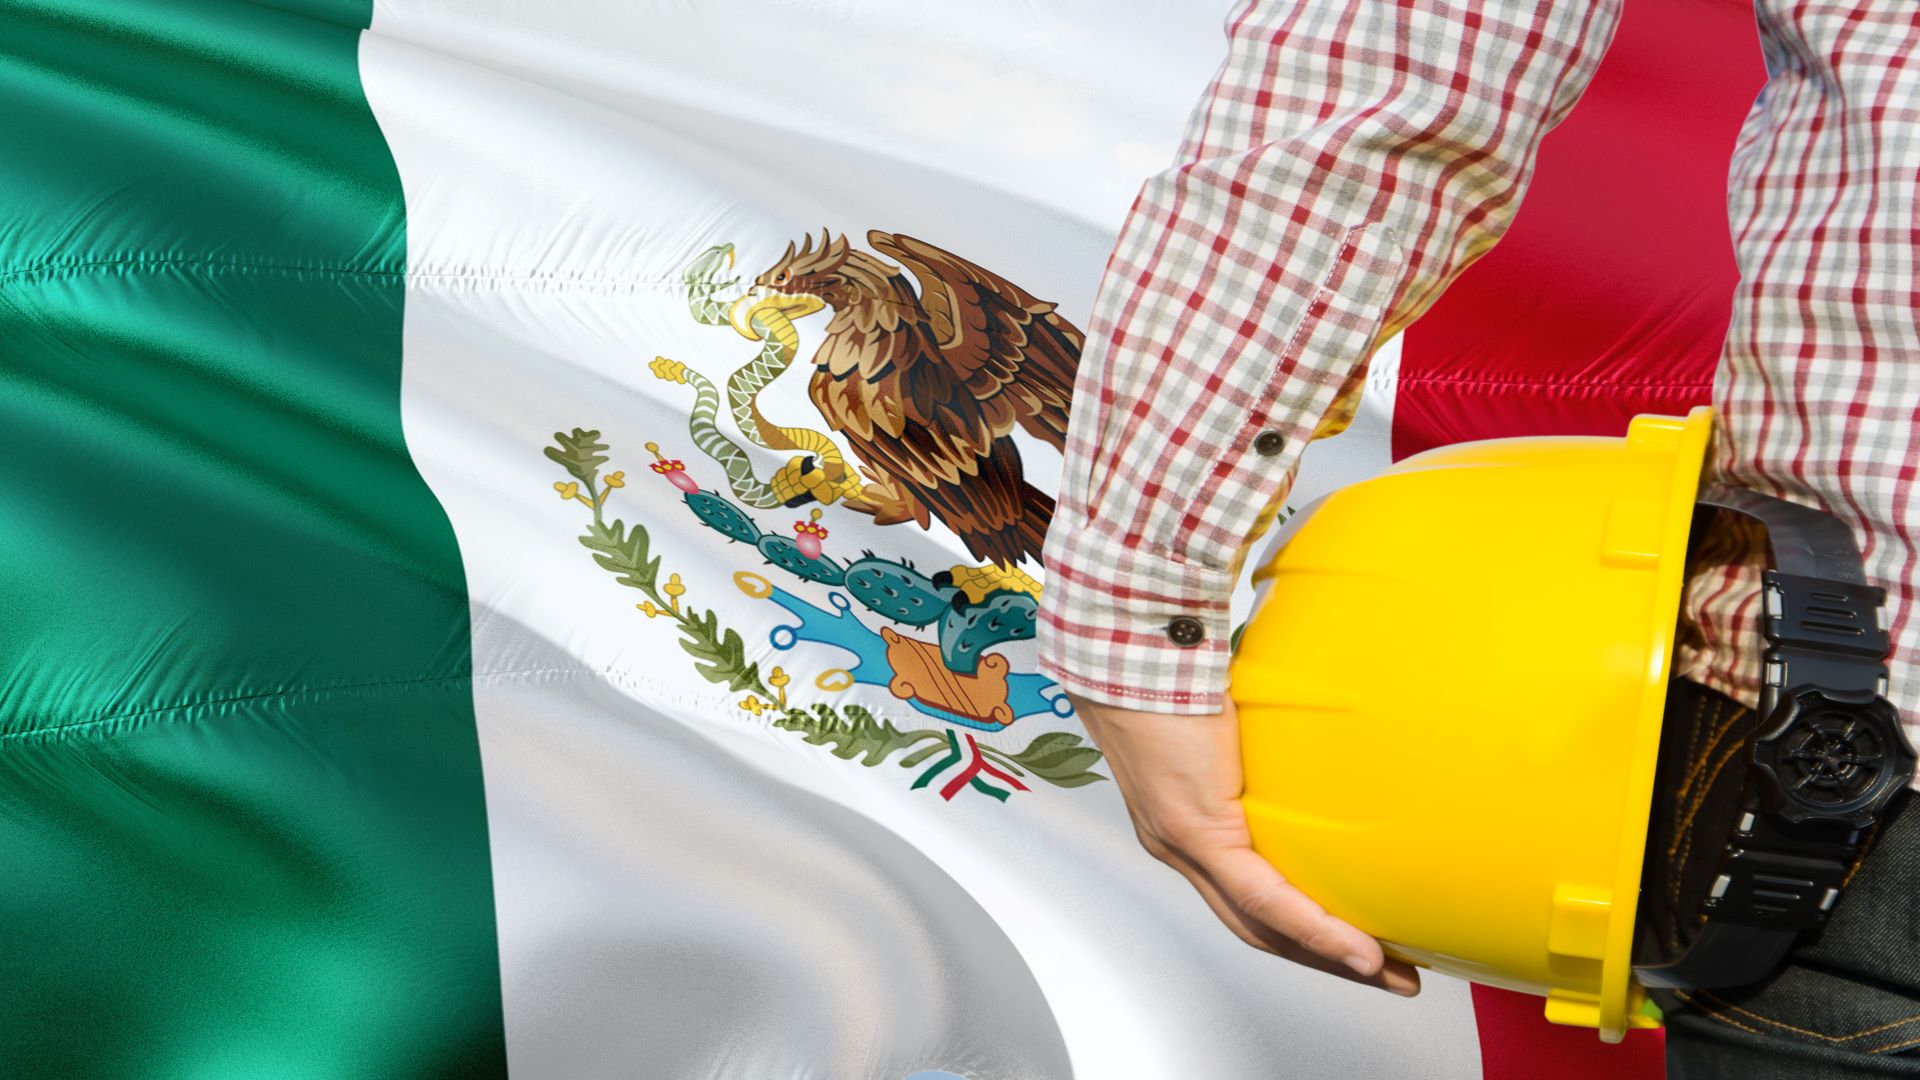 Construction worker with yellow hard hat standing in from of waving Mexico flag.